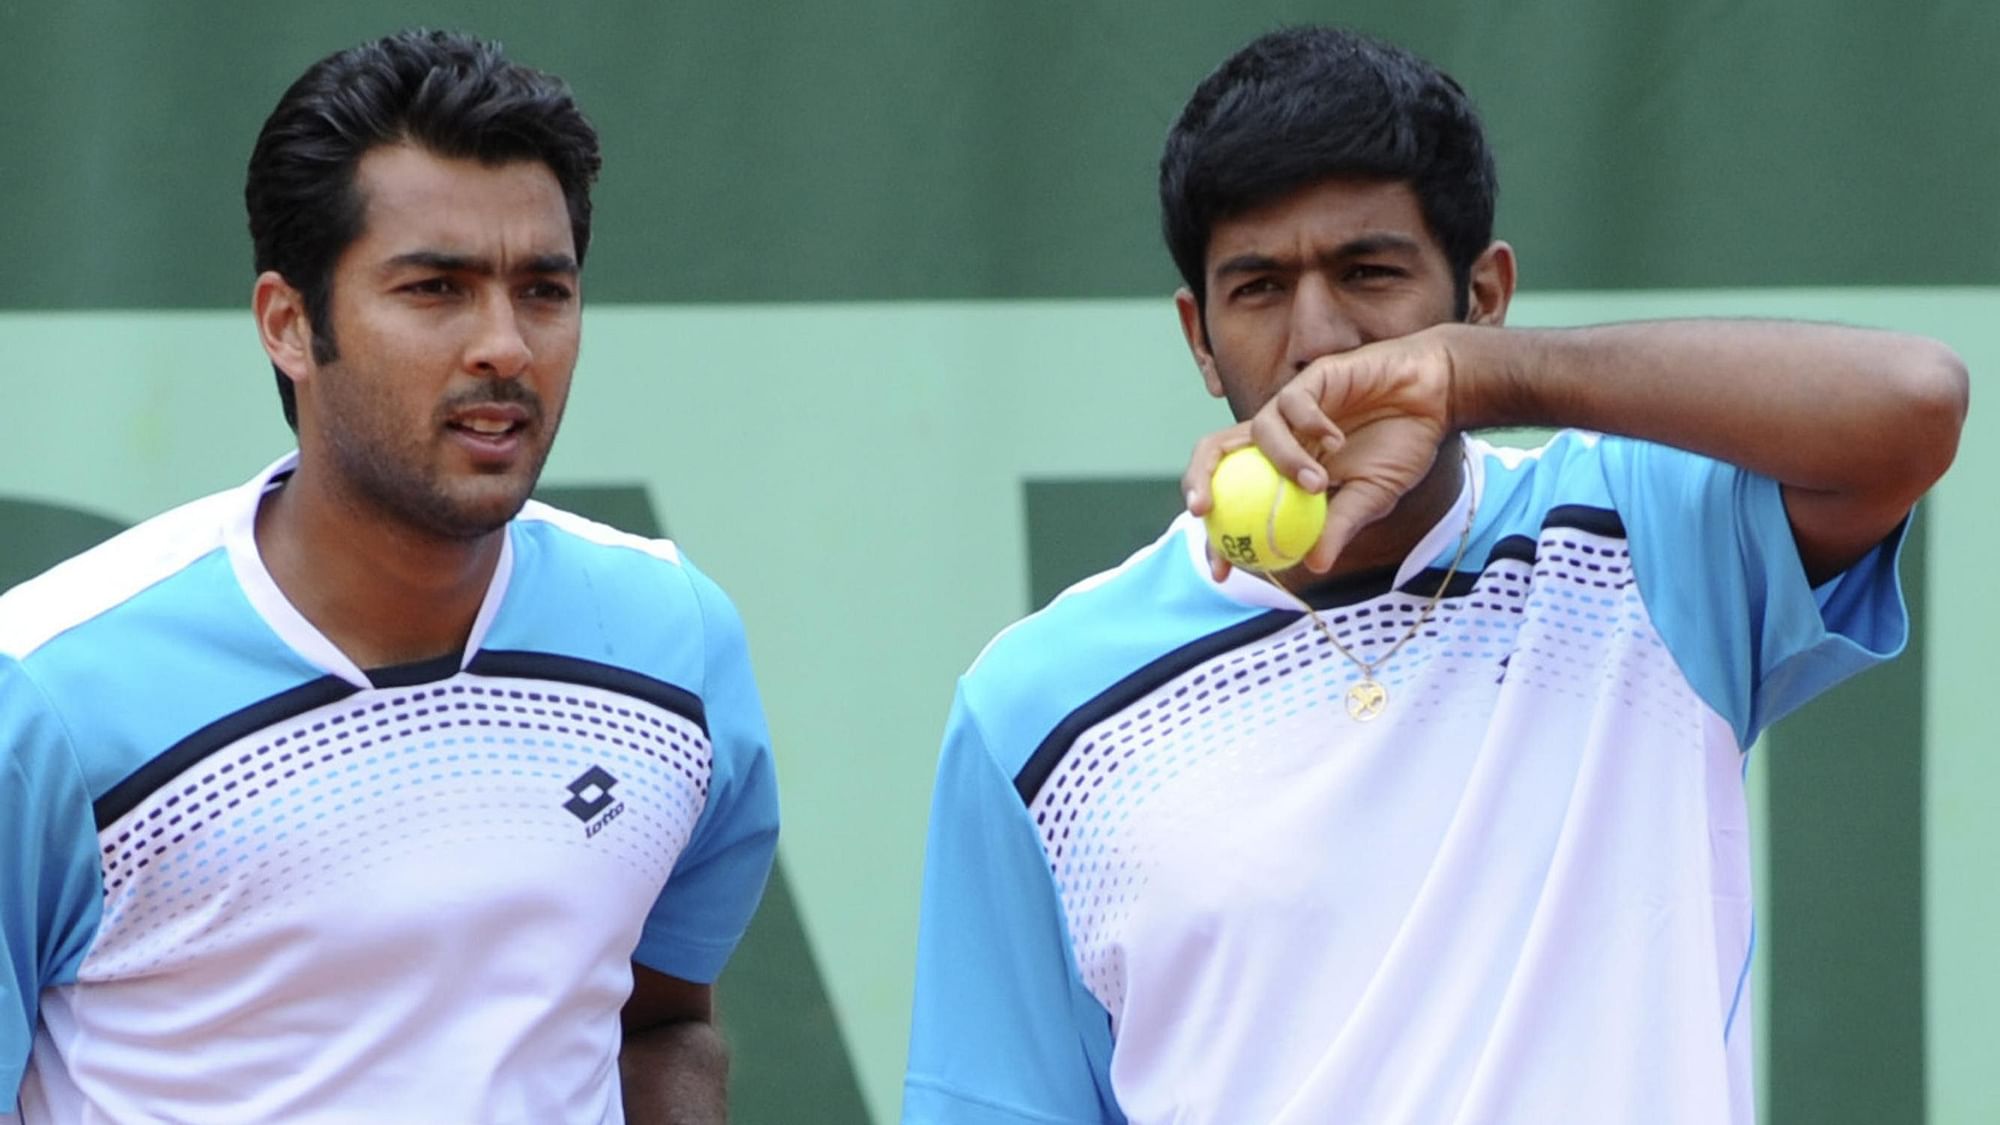 Aisam-ul-Haq Qureshi (left) has pulled out of the Davis Cup tie against India.